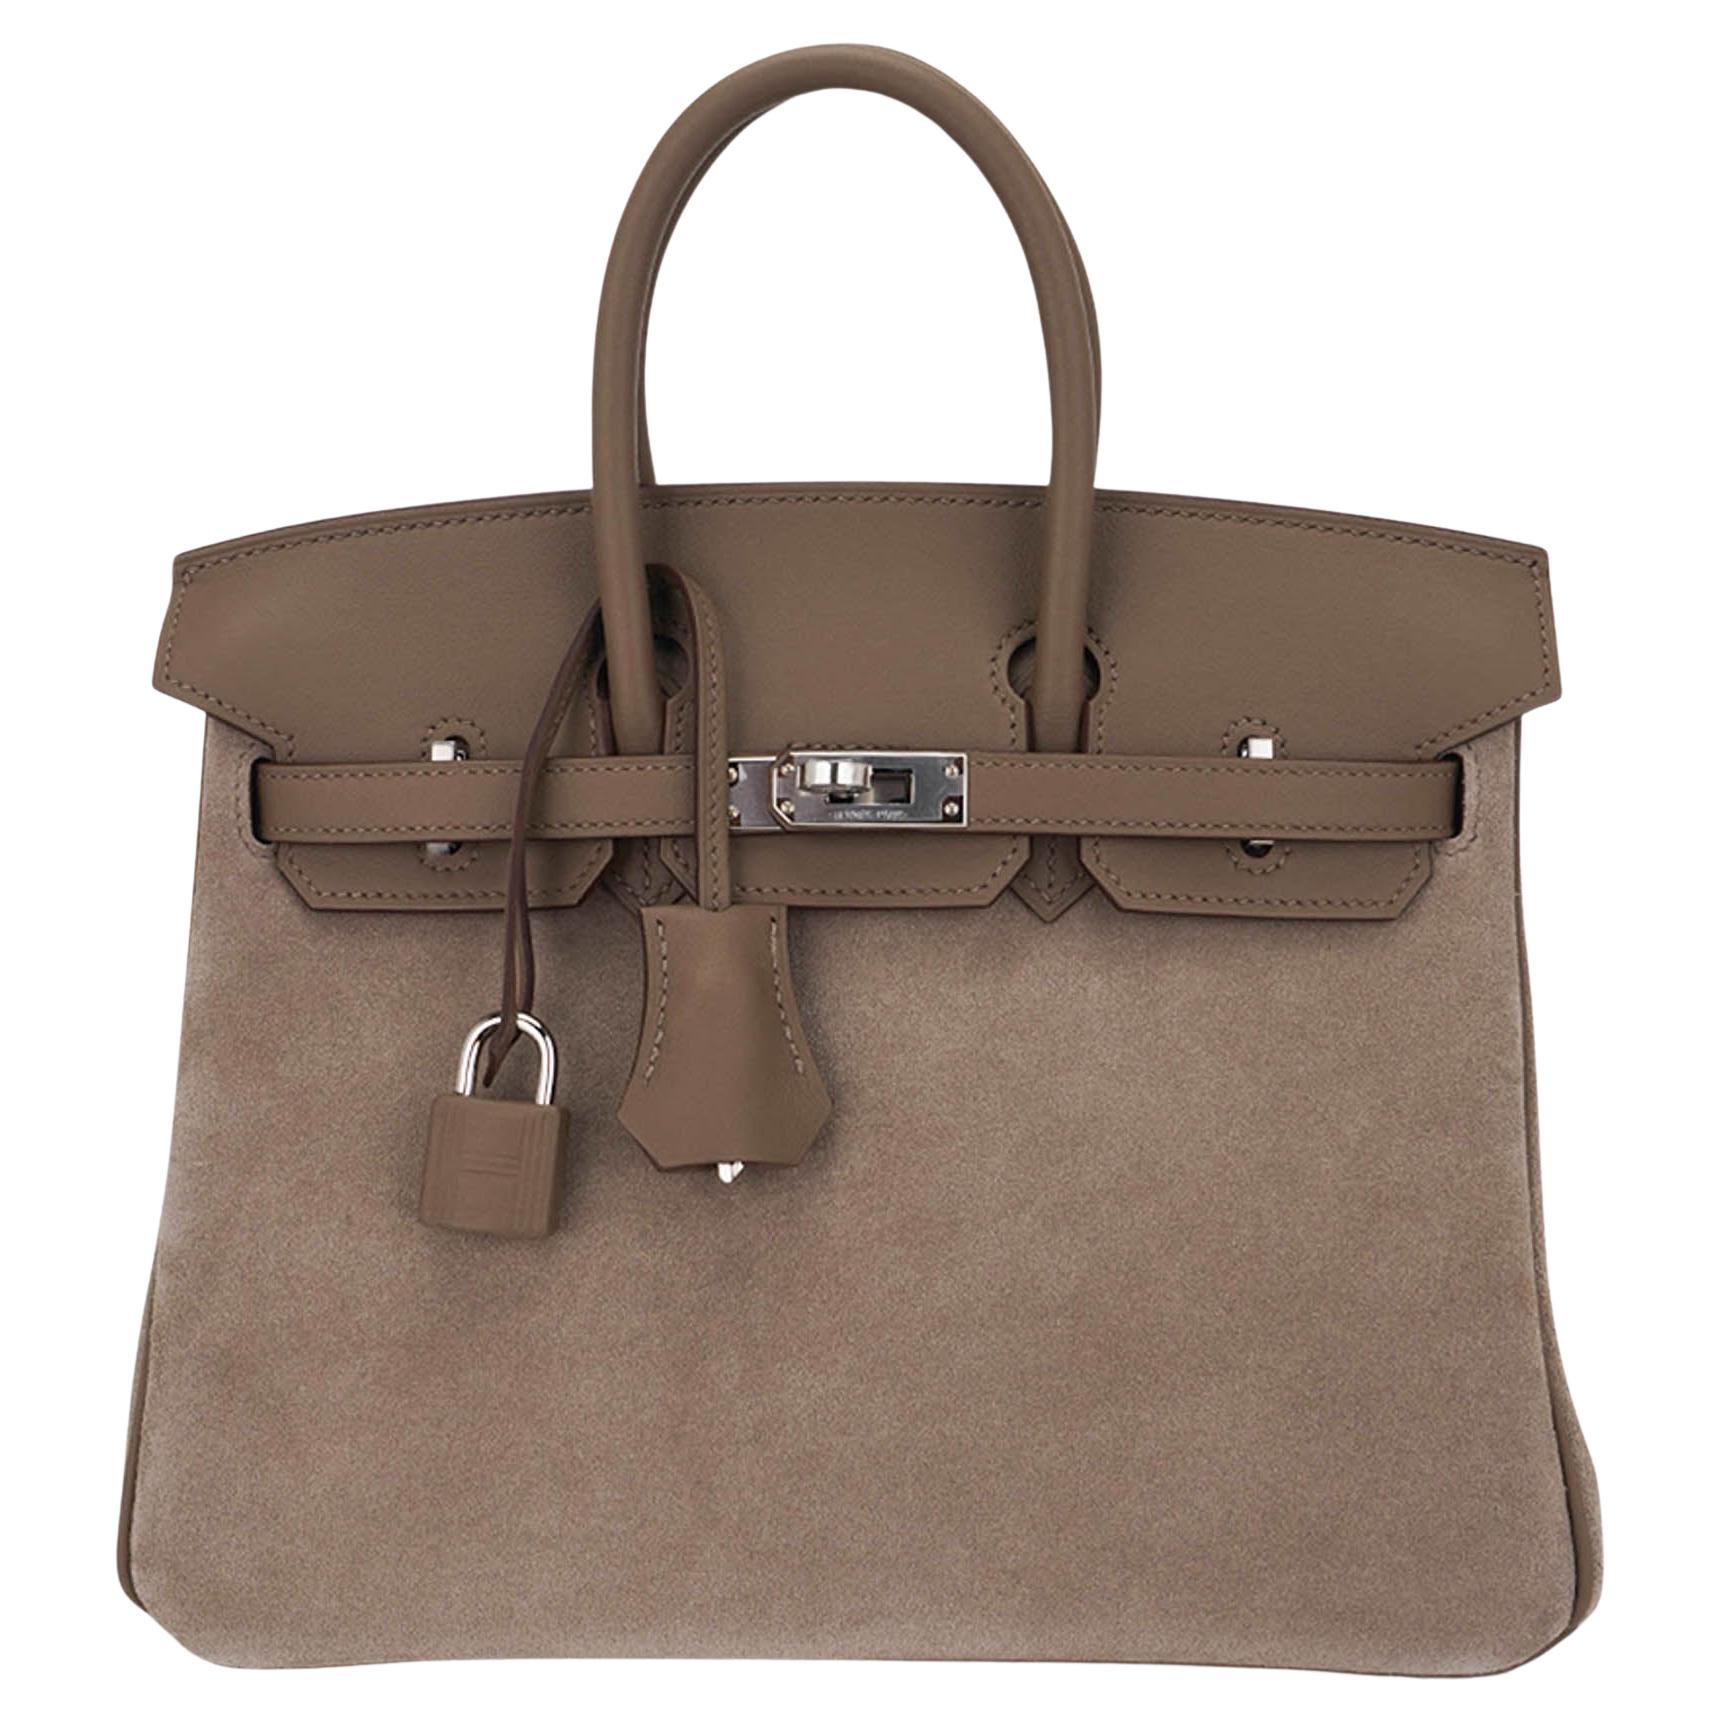 Hermes Birkin 25 Limited Edition Grizzly Gris Caillou Etoupe Swift Leather Bag For Sale